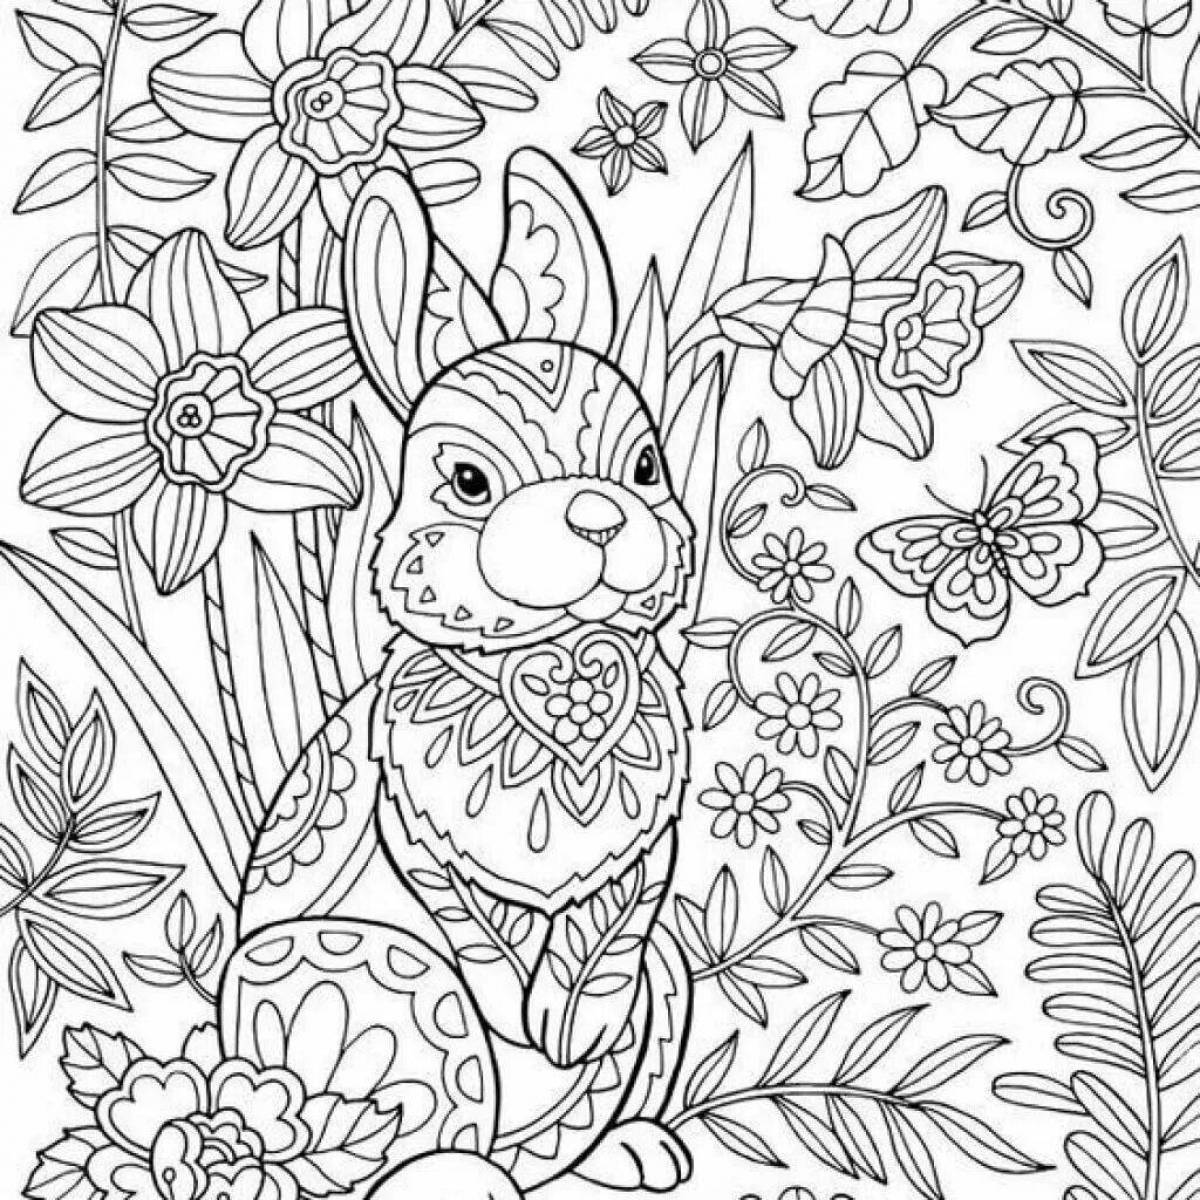 Colorable 10 year old animals coloring book